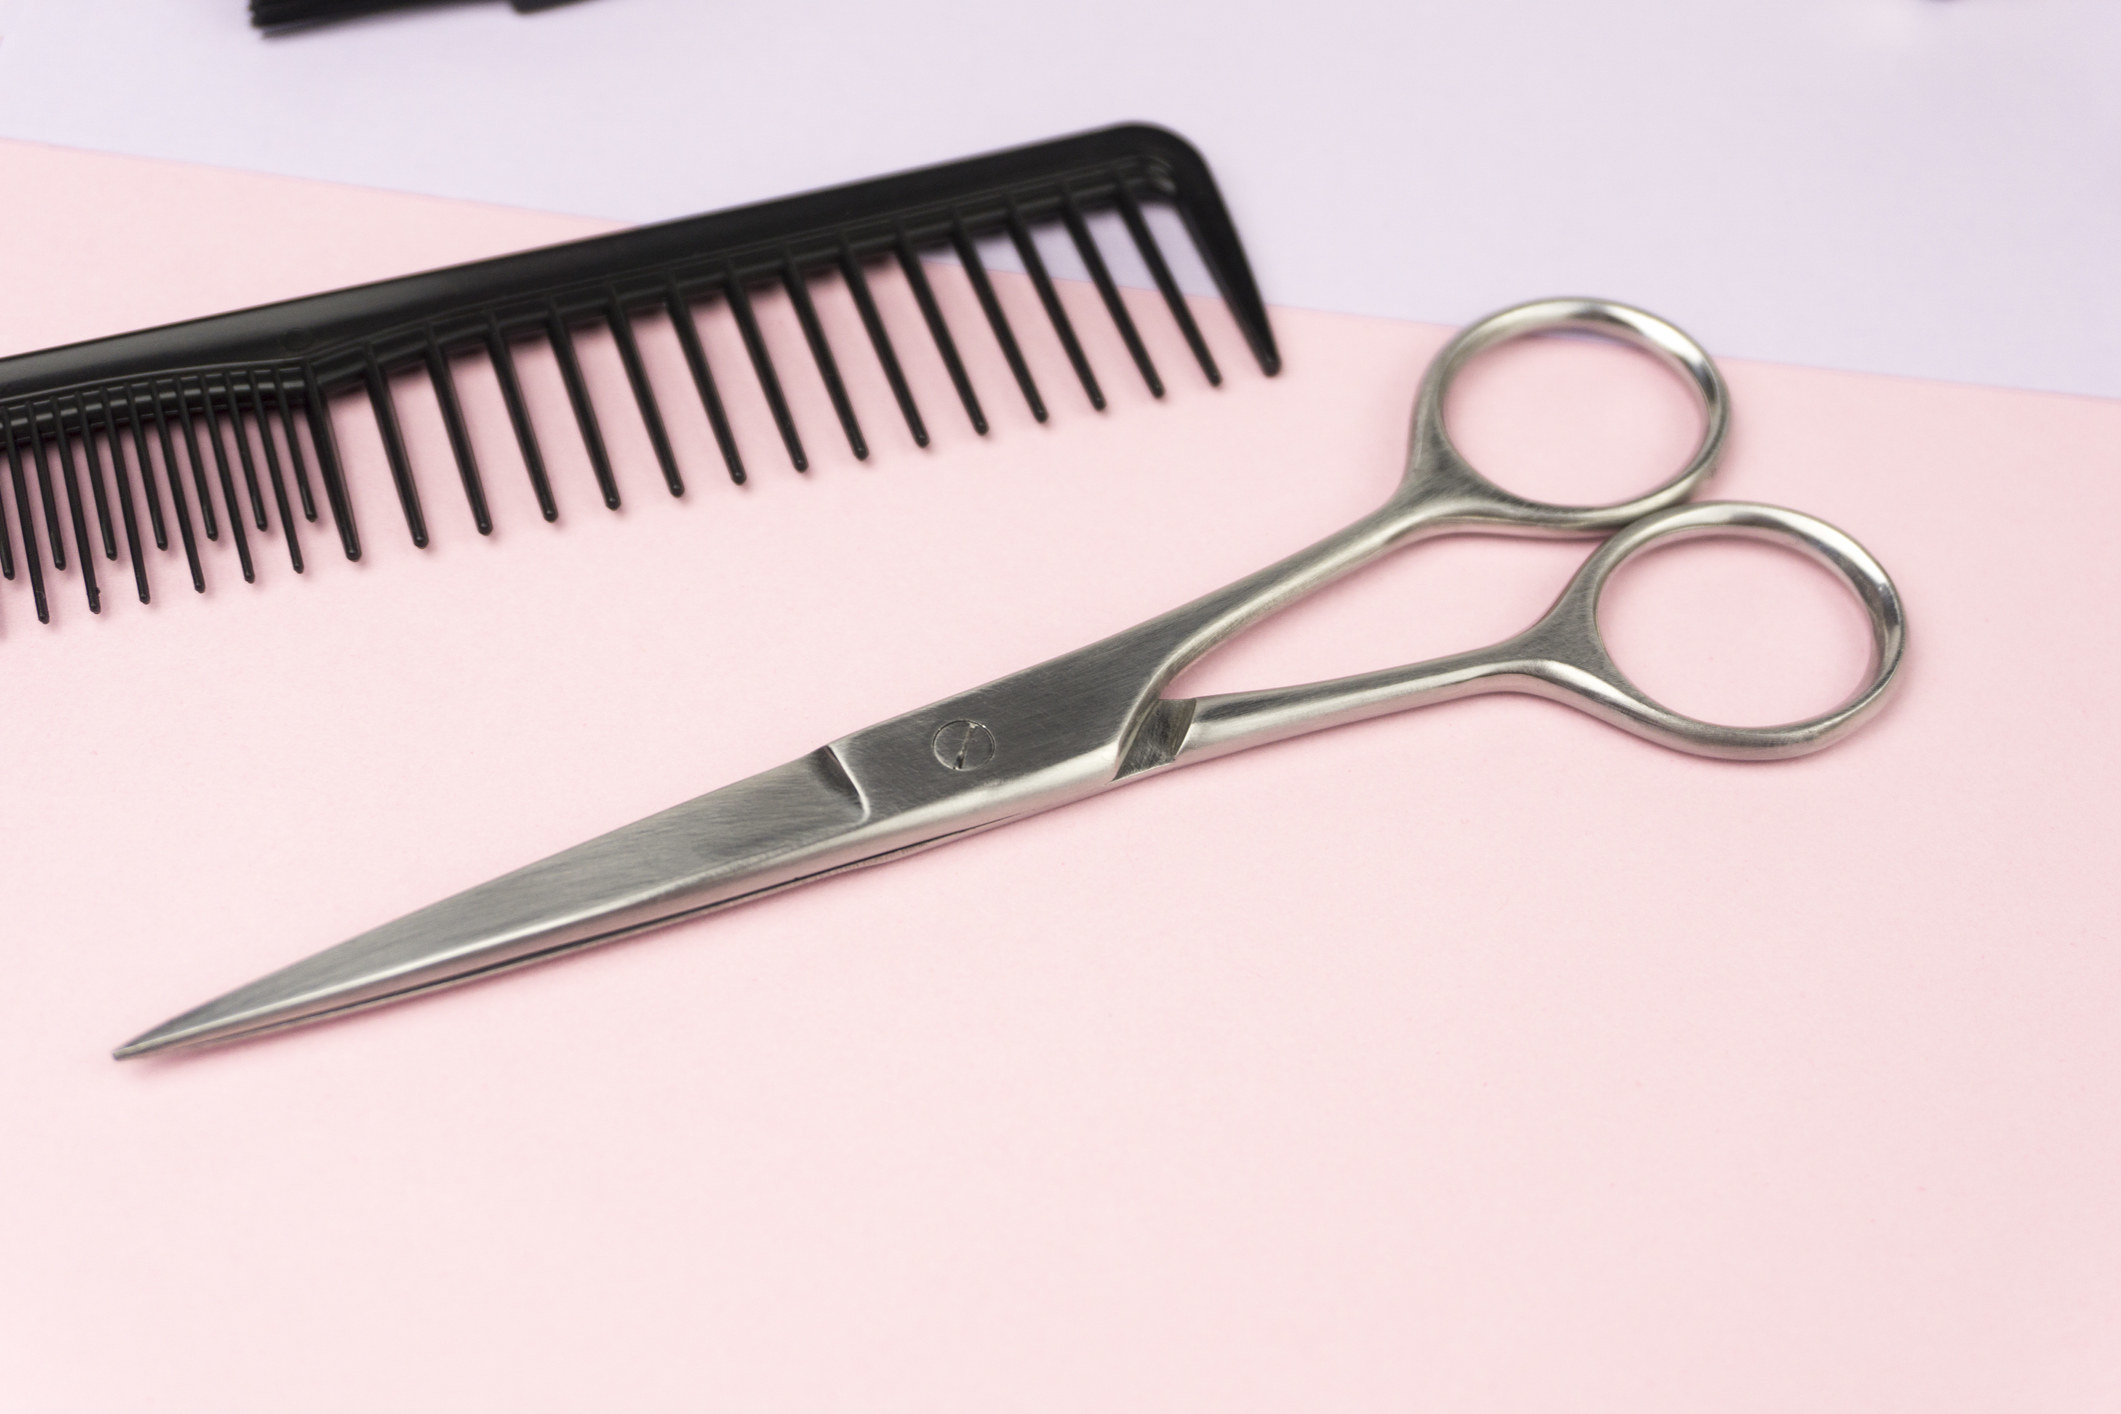 Scissors and a comb on a table